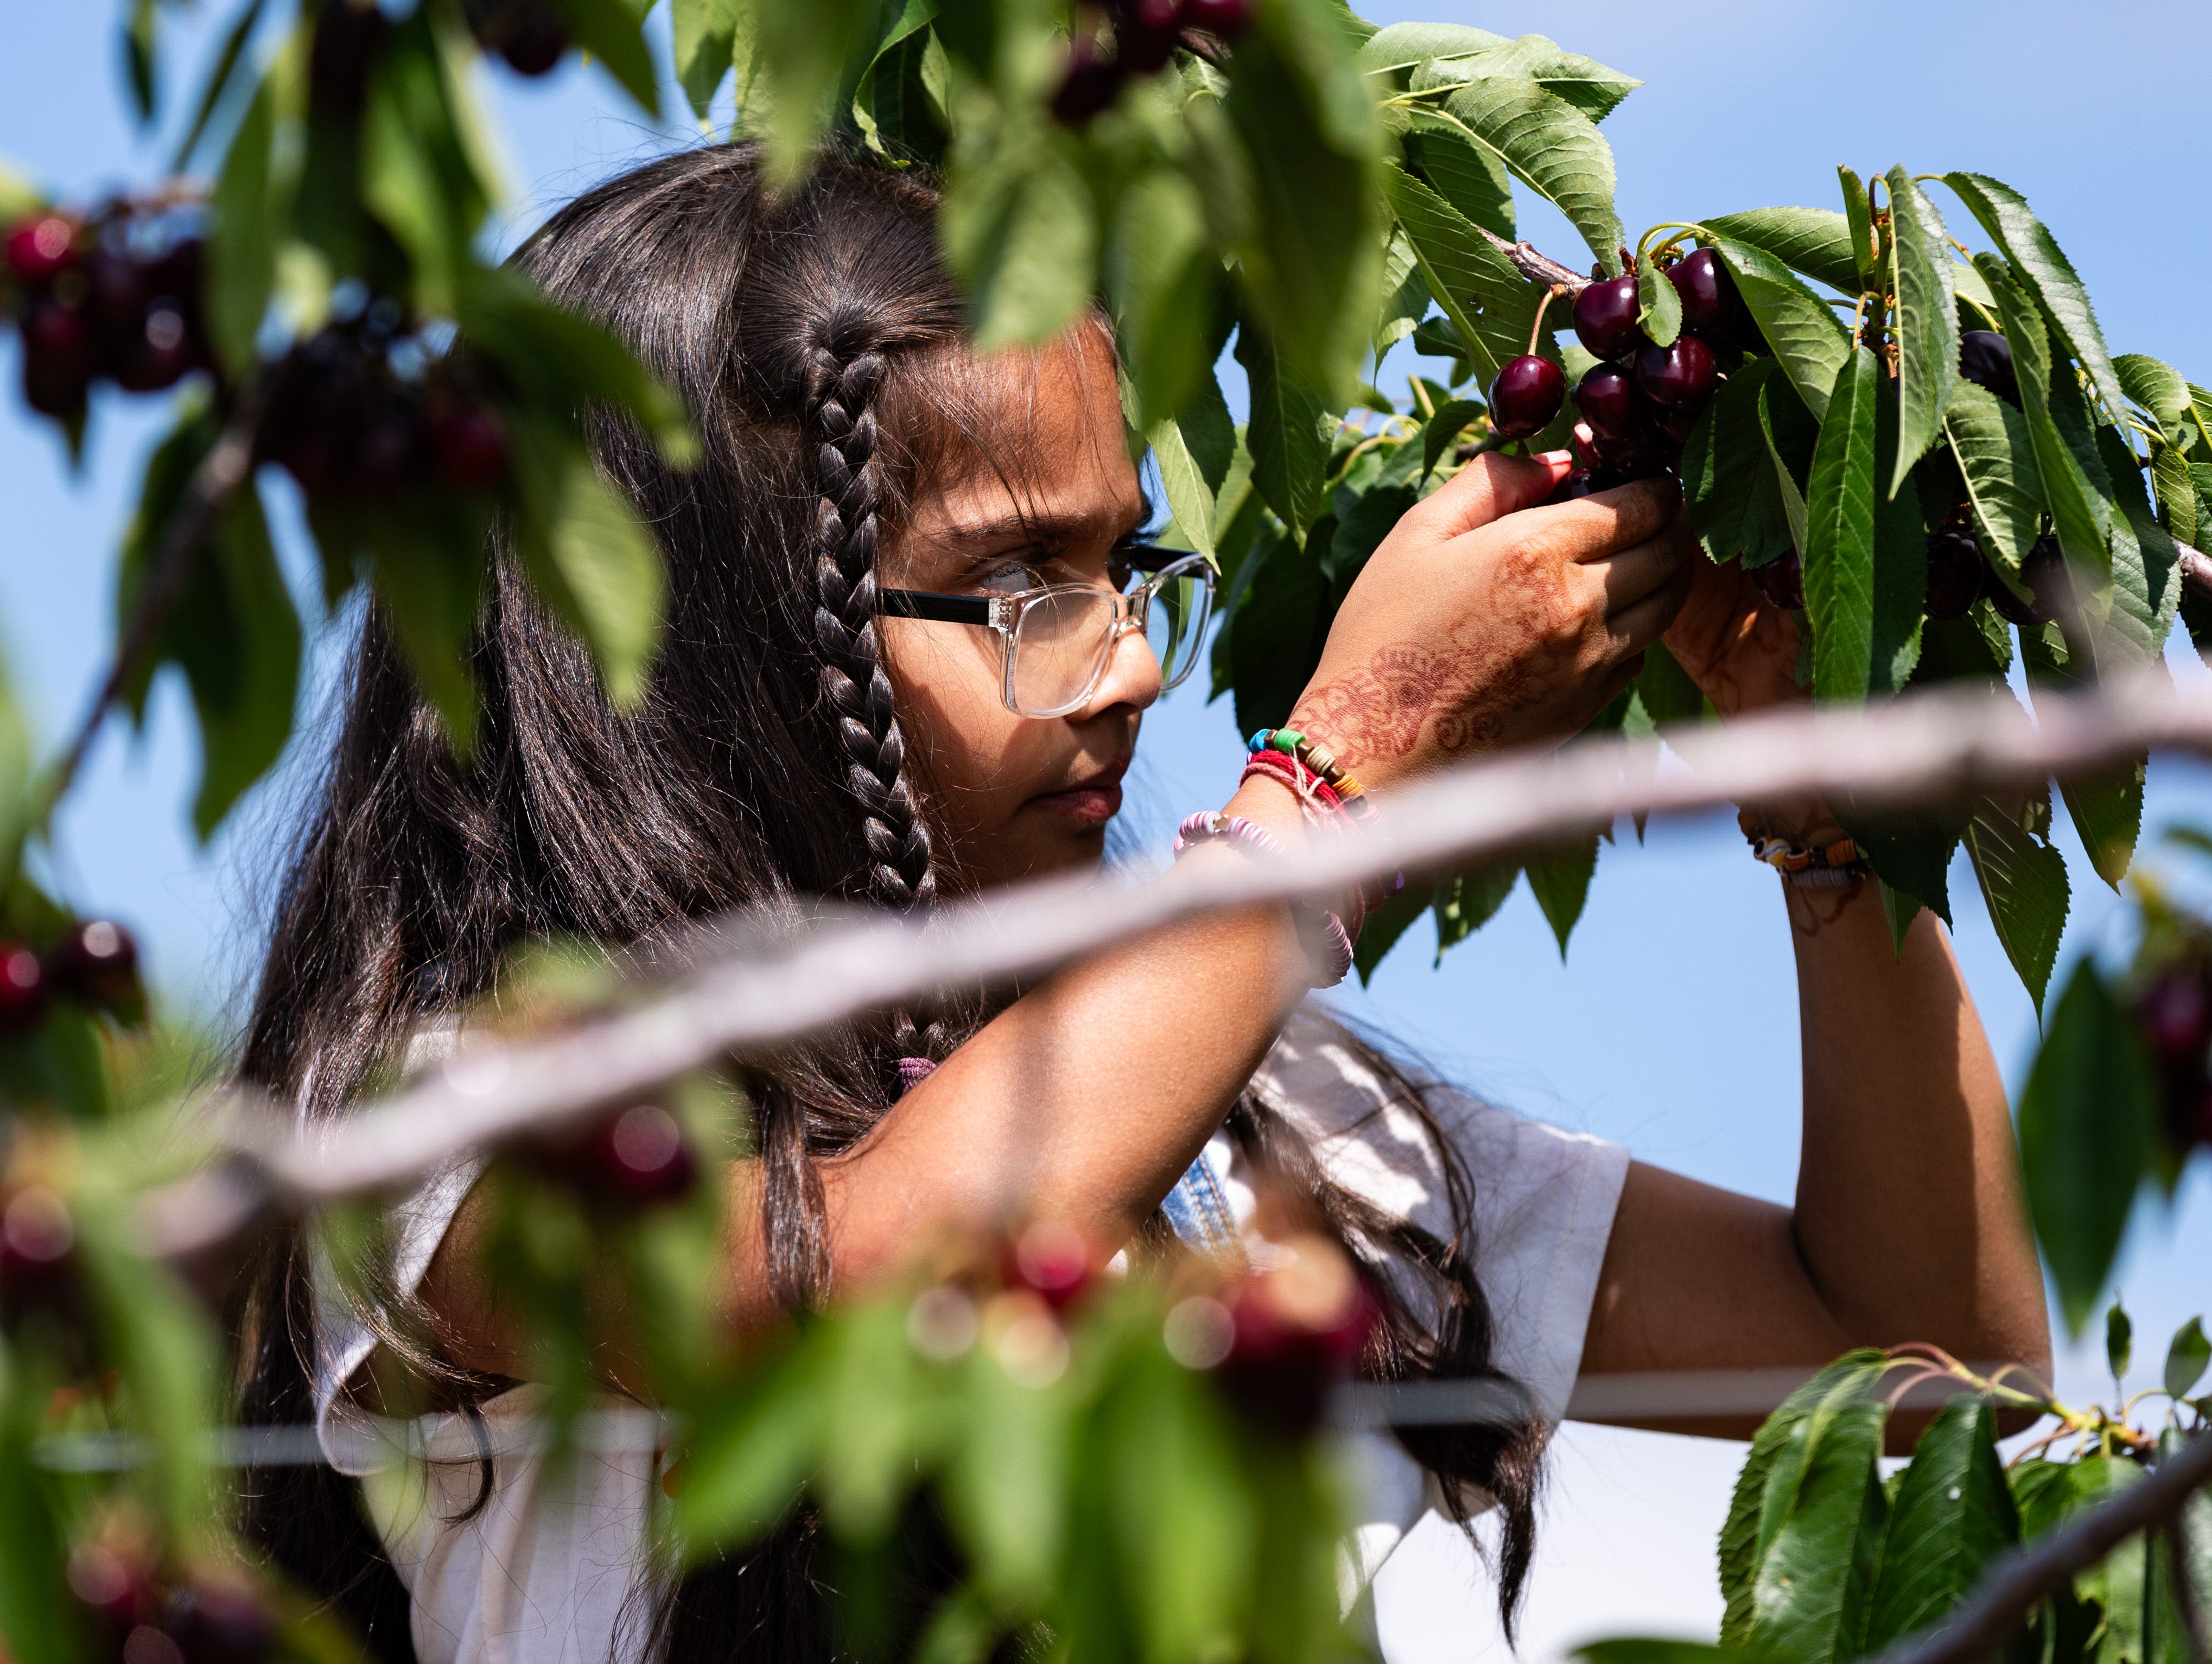 It's time to pick your own cherries in Door County. Here's how the cherries are this year